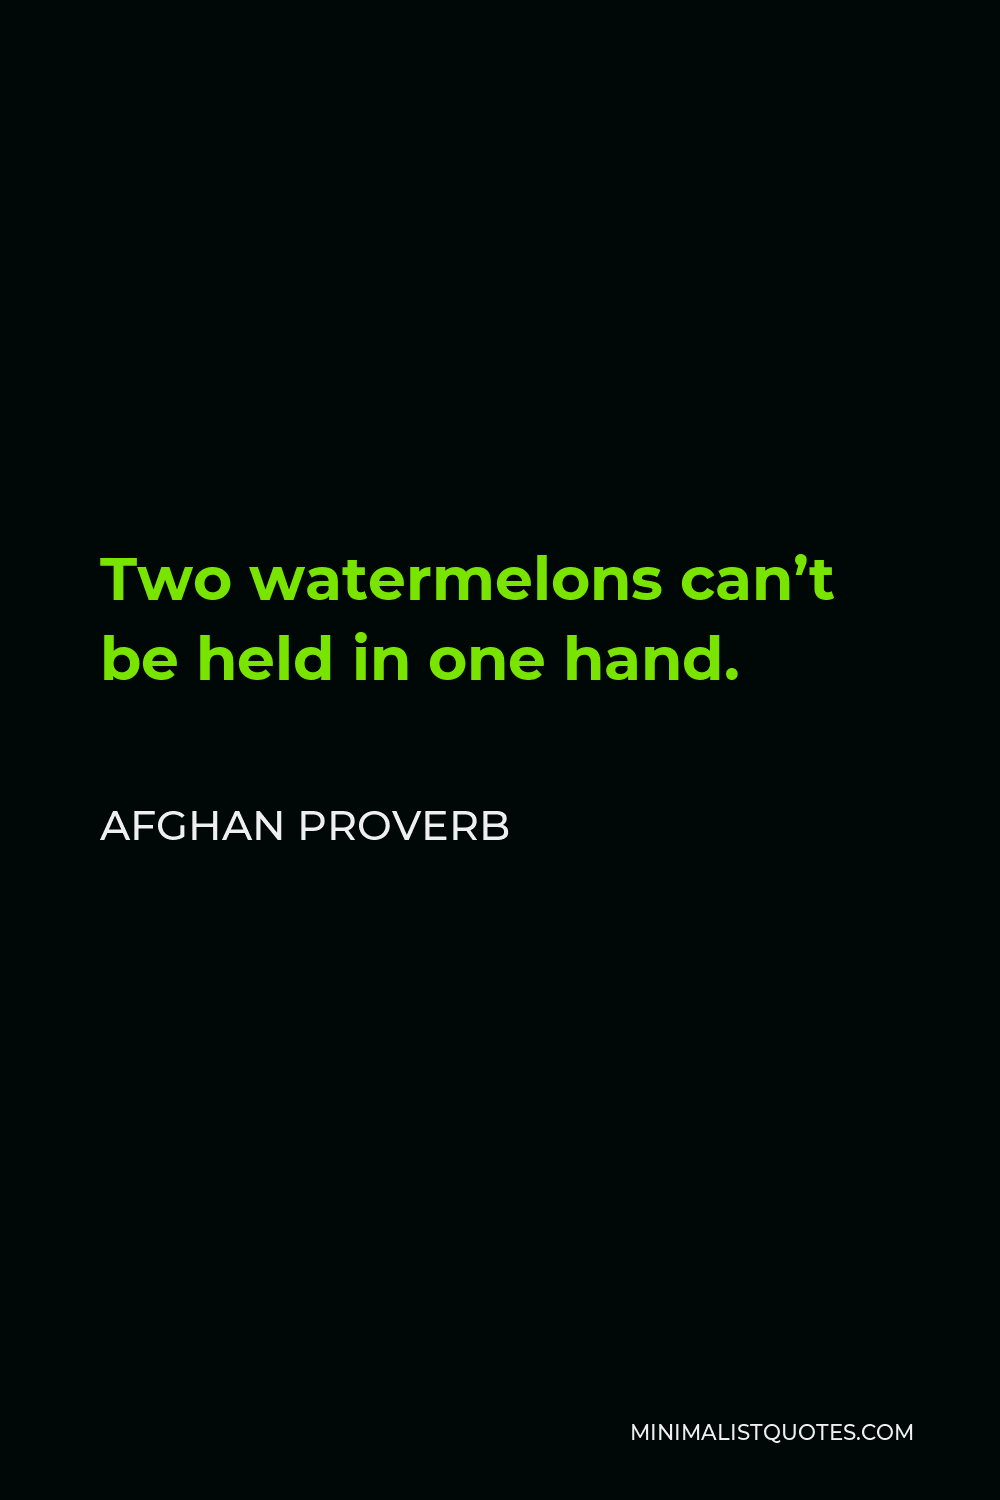 Afghan Proverb Quote - Two watermelons can’t be held in one hand.